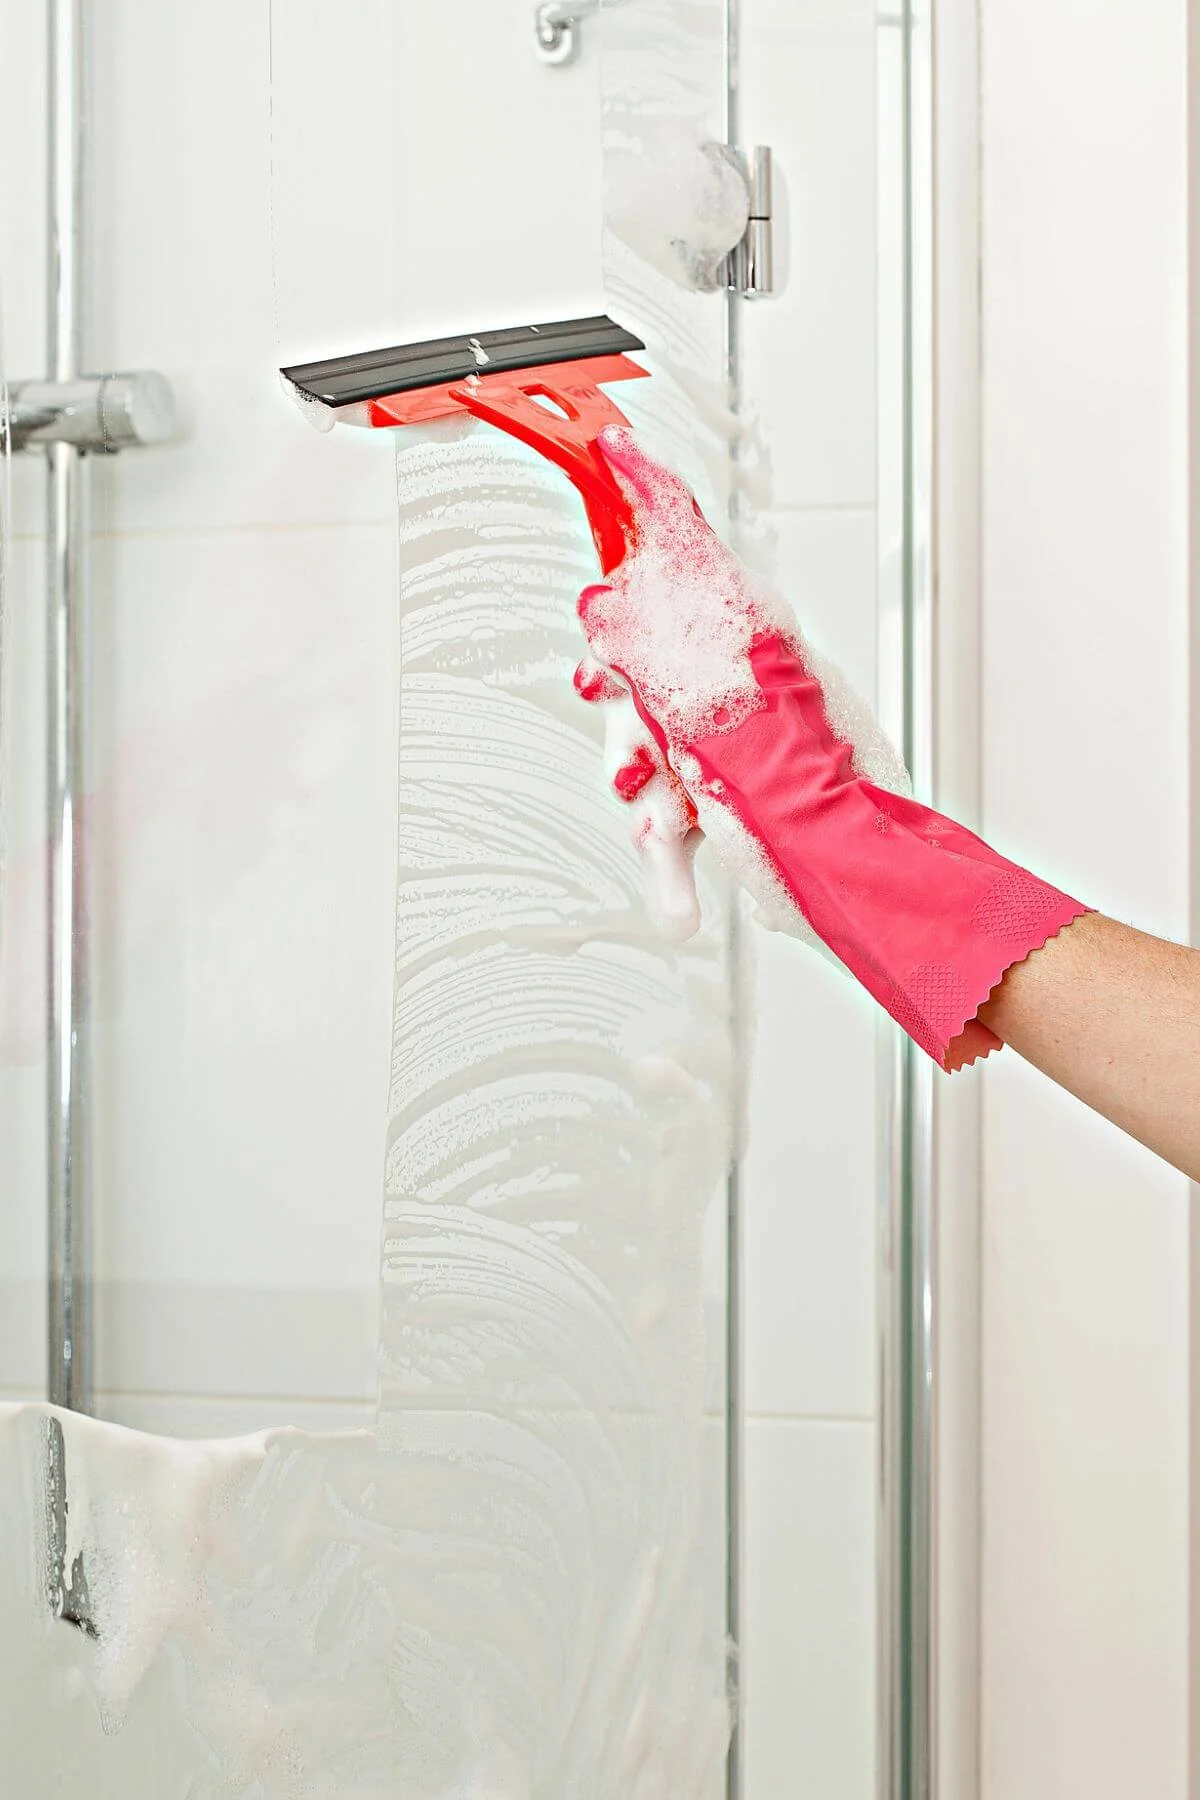 Cleaning shower with squeegee